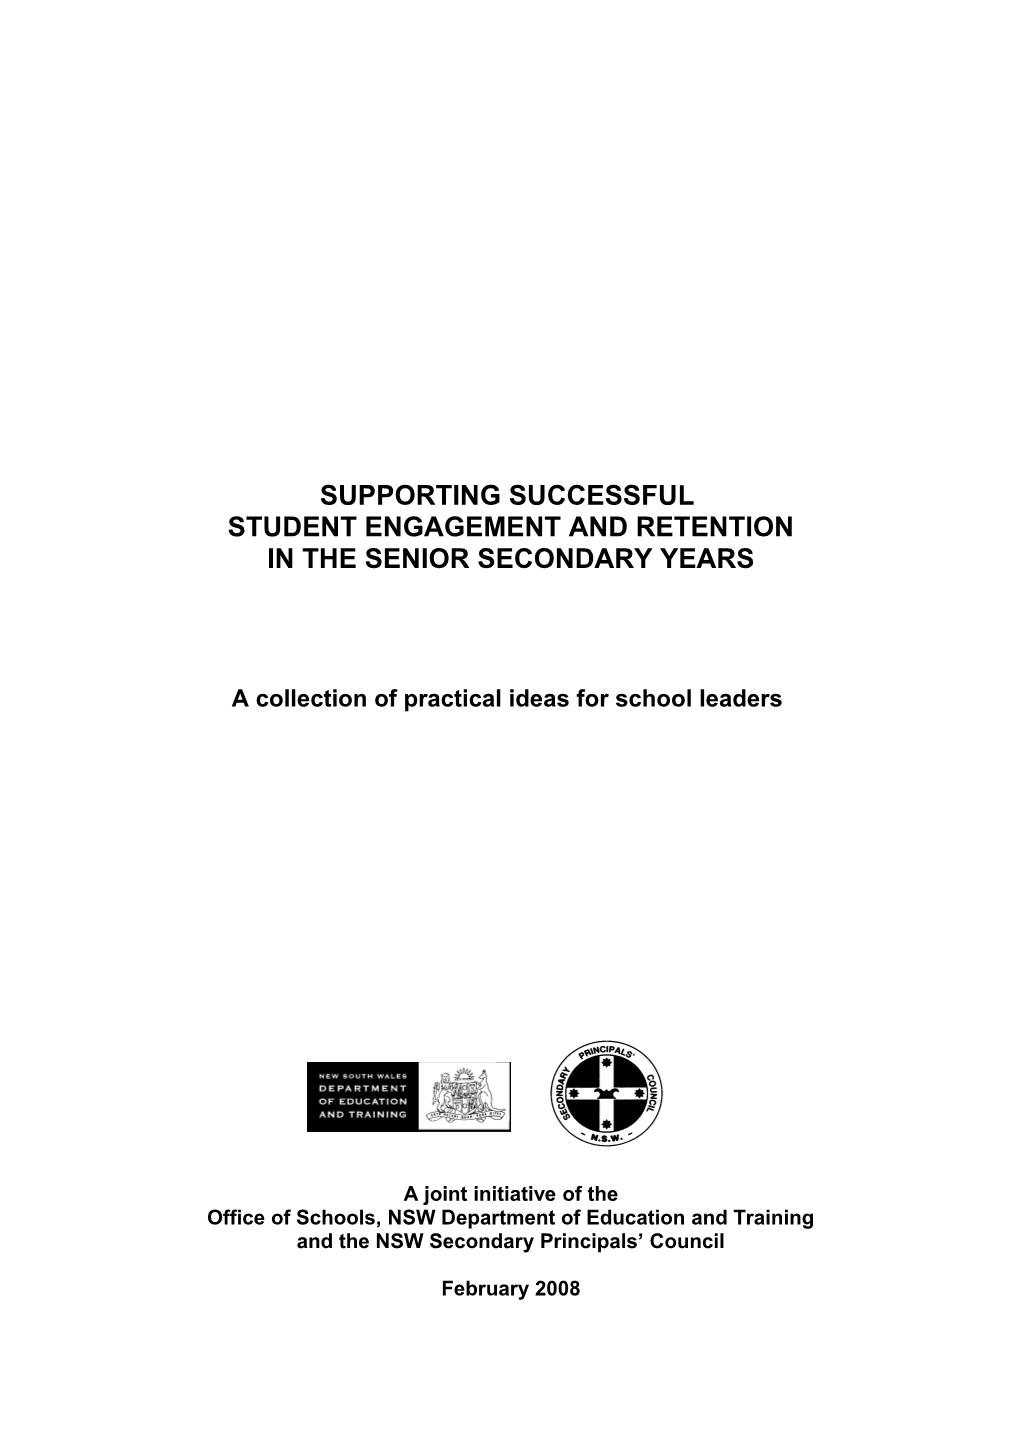 Supporting Successful Student Engagement and Retention in the Senior Years